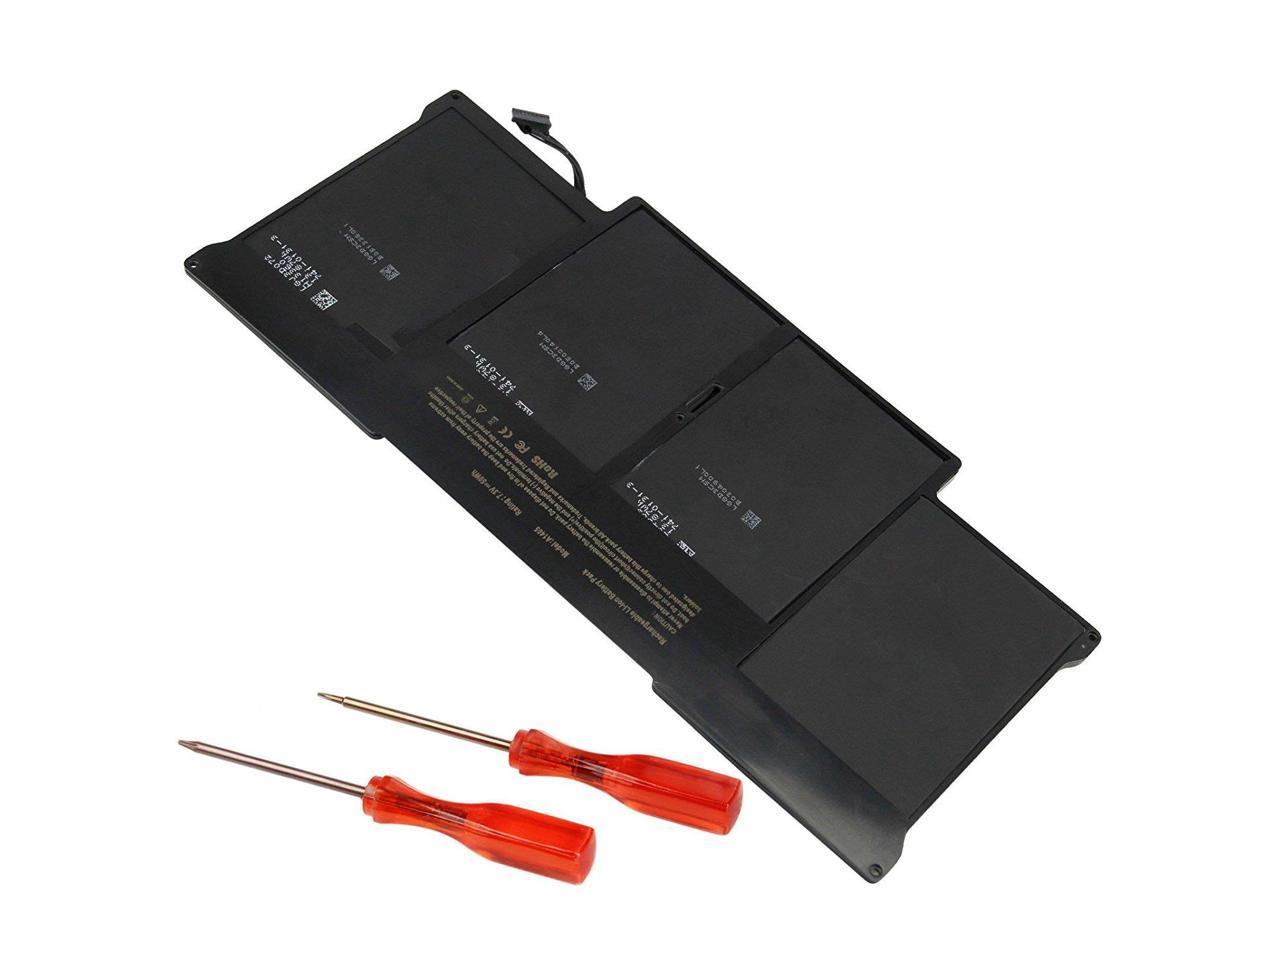 2015 macbook pro 13 inch battery replacement